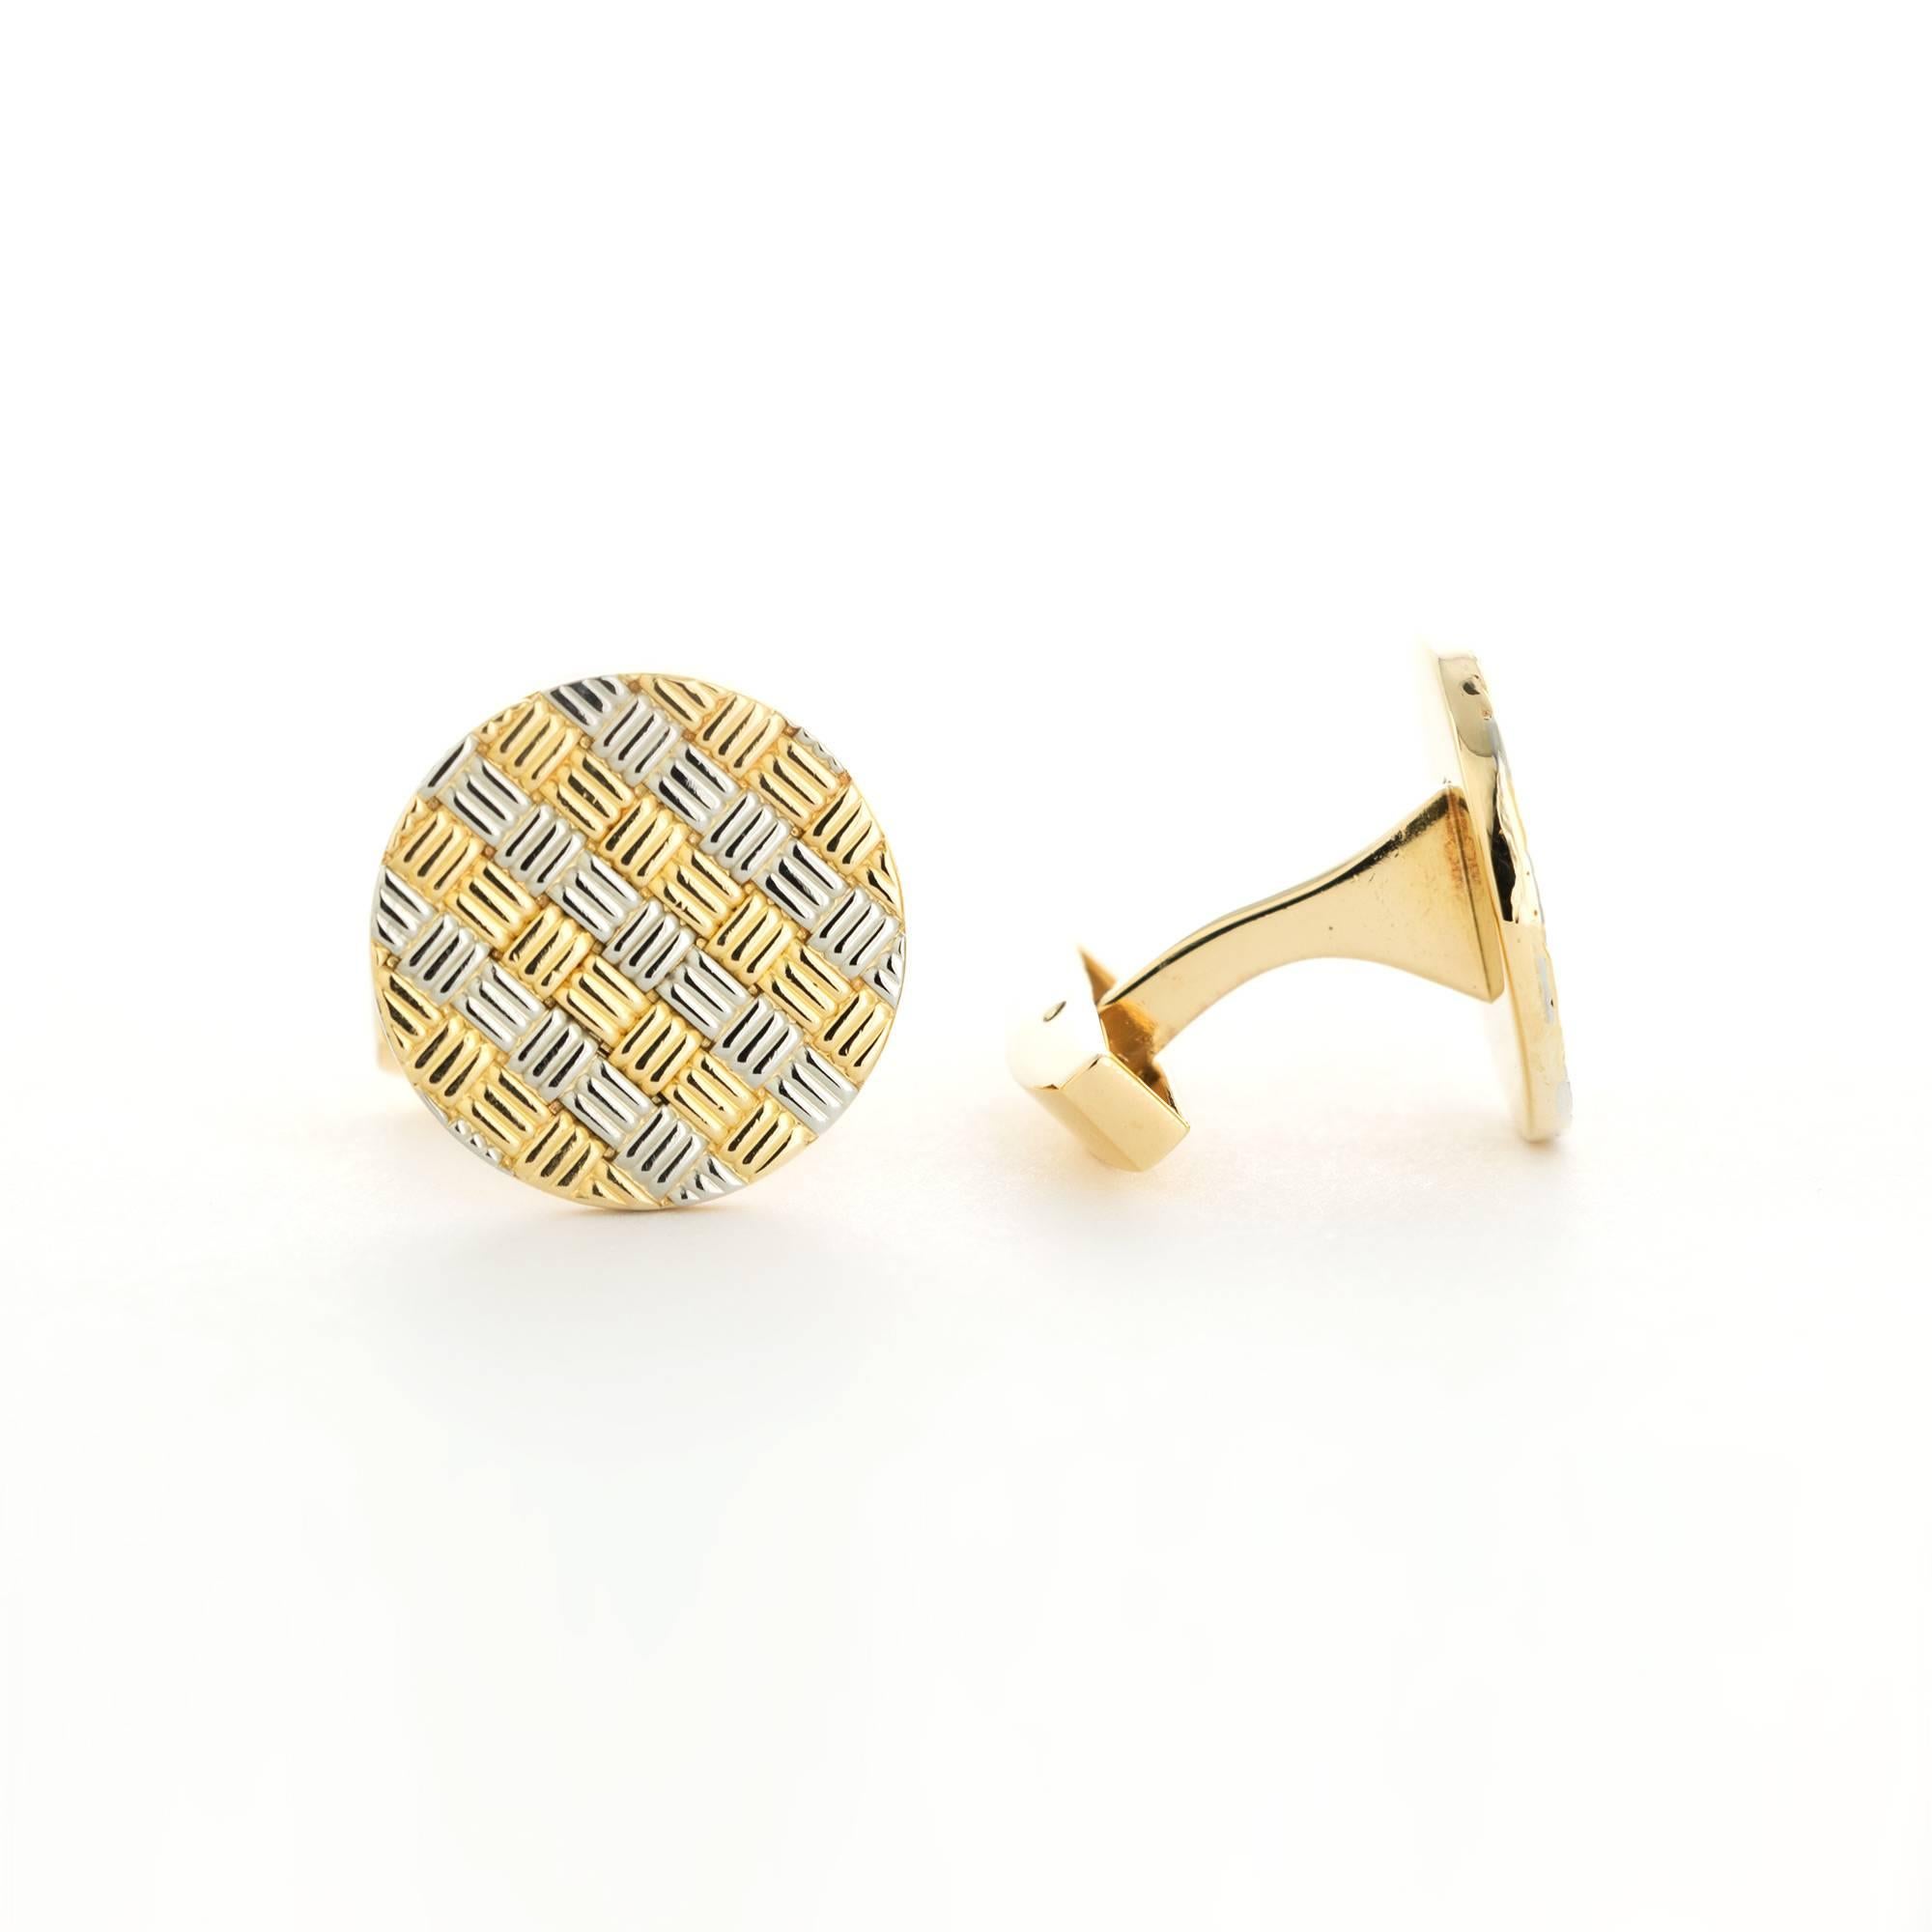 A Pair of 18k Yellow & White Gold Cufflinks by Van Cleef & Arpels. Made in France. Signed 